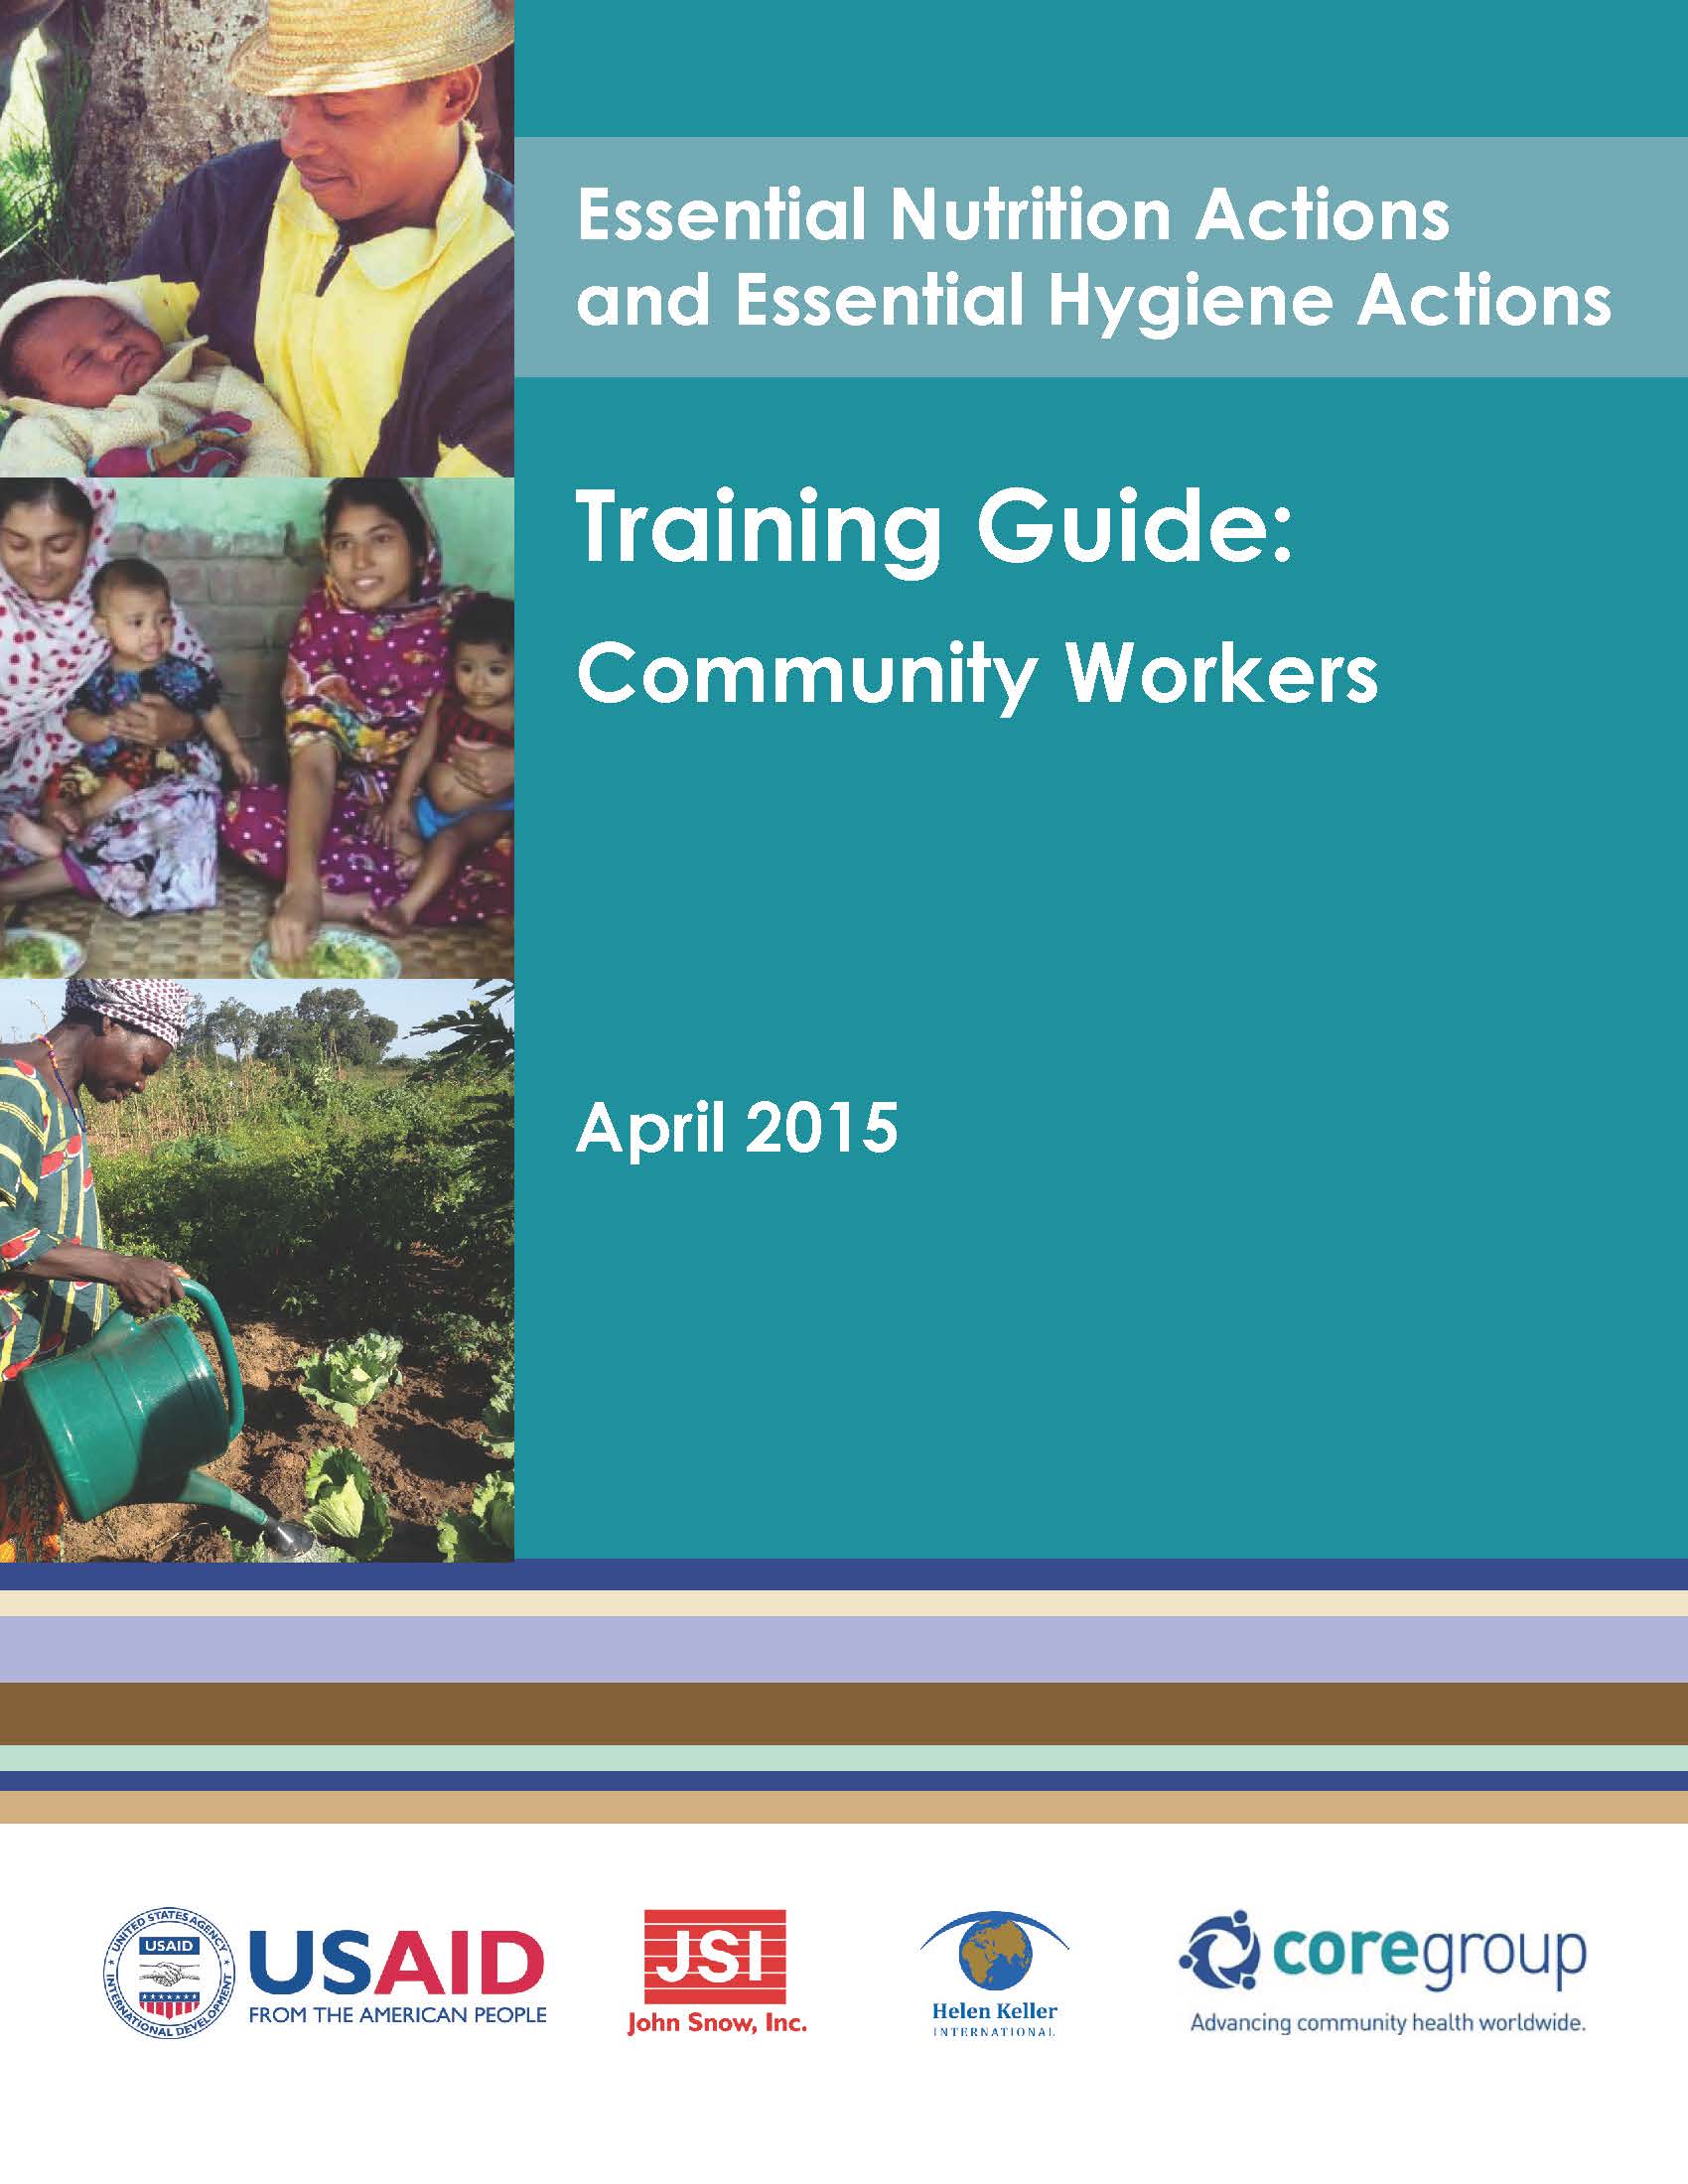 Download Resource: Essential Nutrition Actions and Essential Hygiene Actions Framework